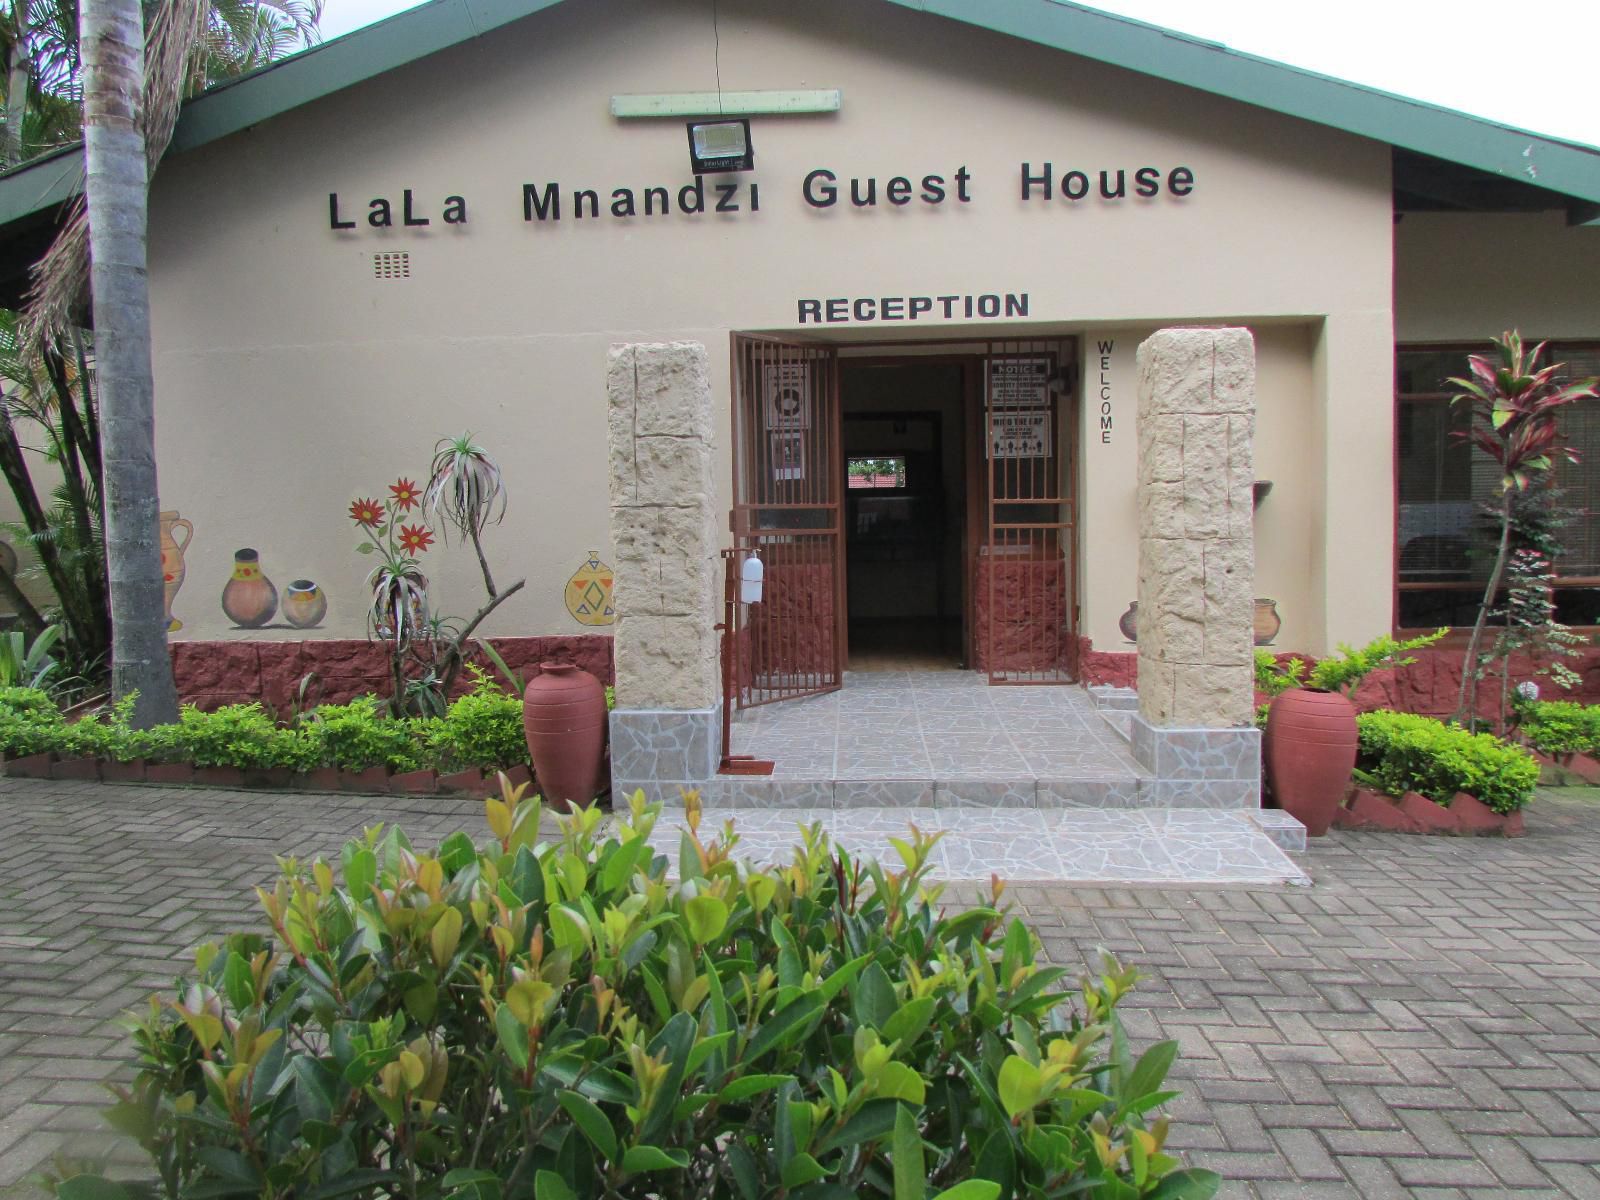 Lalamnandzi1 Guesthouse White River Mpumalanga South Africa House, Building, Architecture